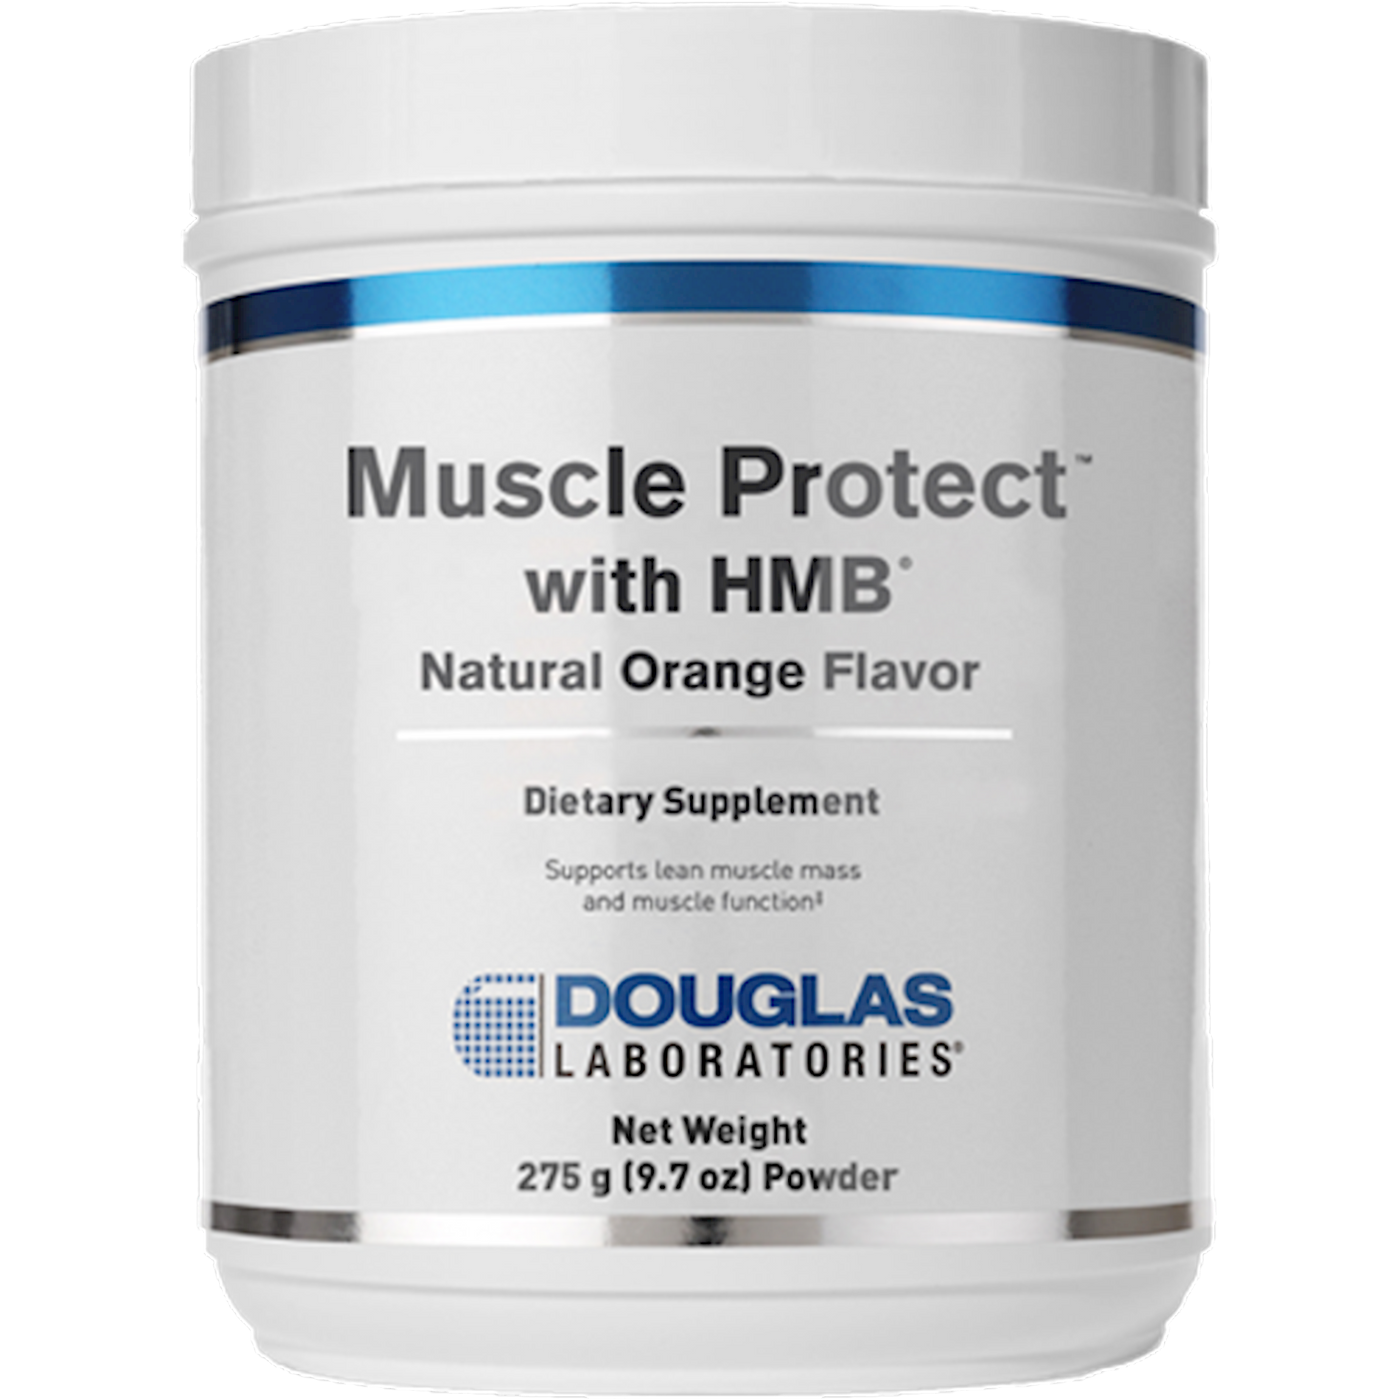 Muscle Protect with HMB ings Curated Wellness